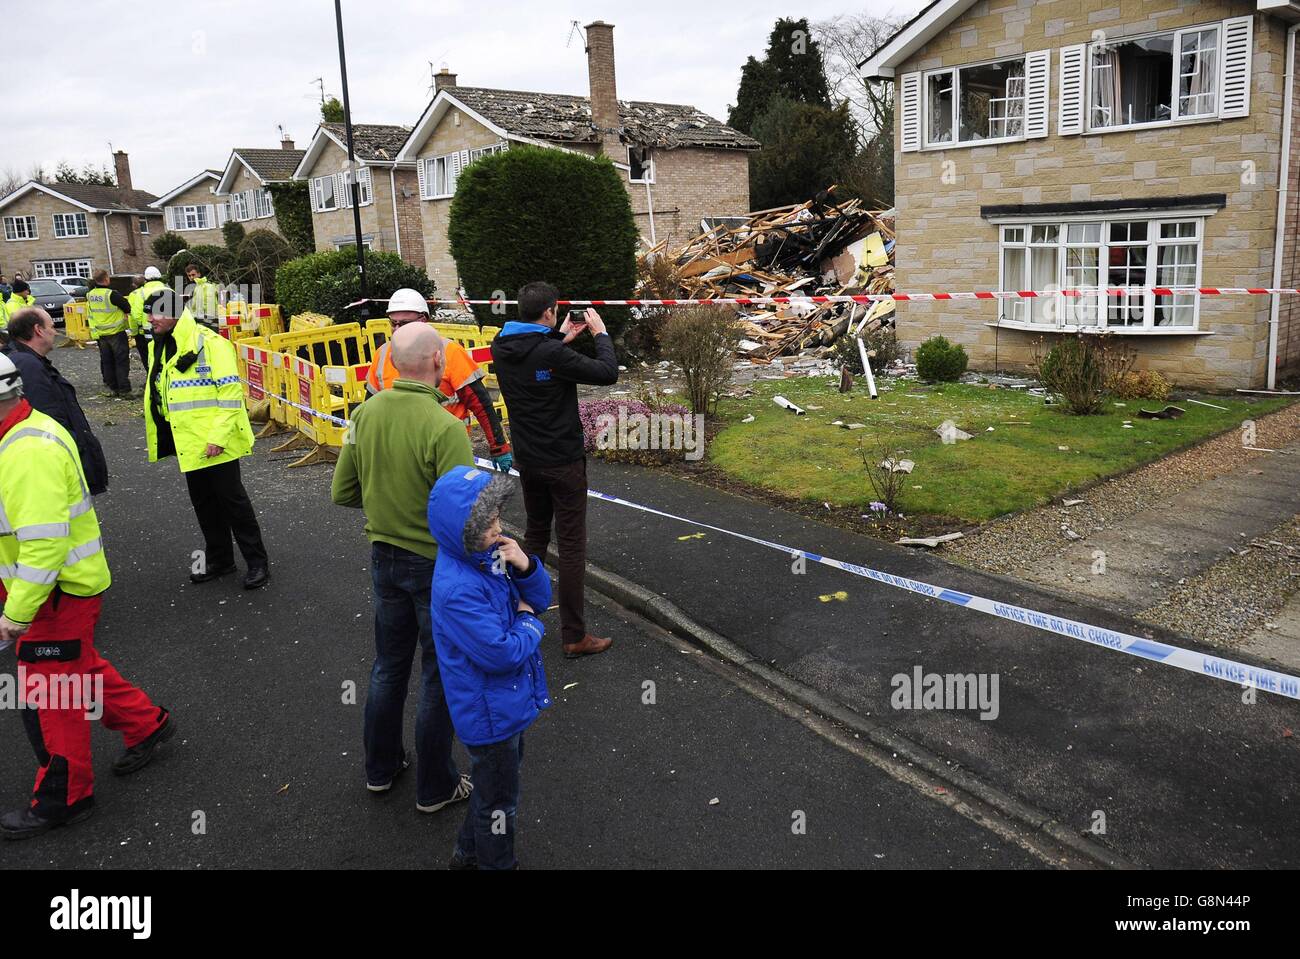 The scene in Haxby, North Yorkshire, after a house was destroyed in an explosion. Stock Photo